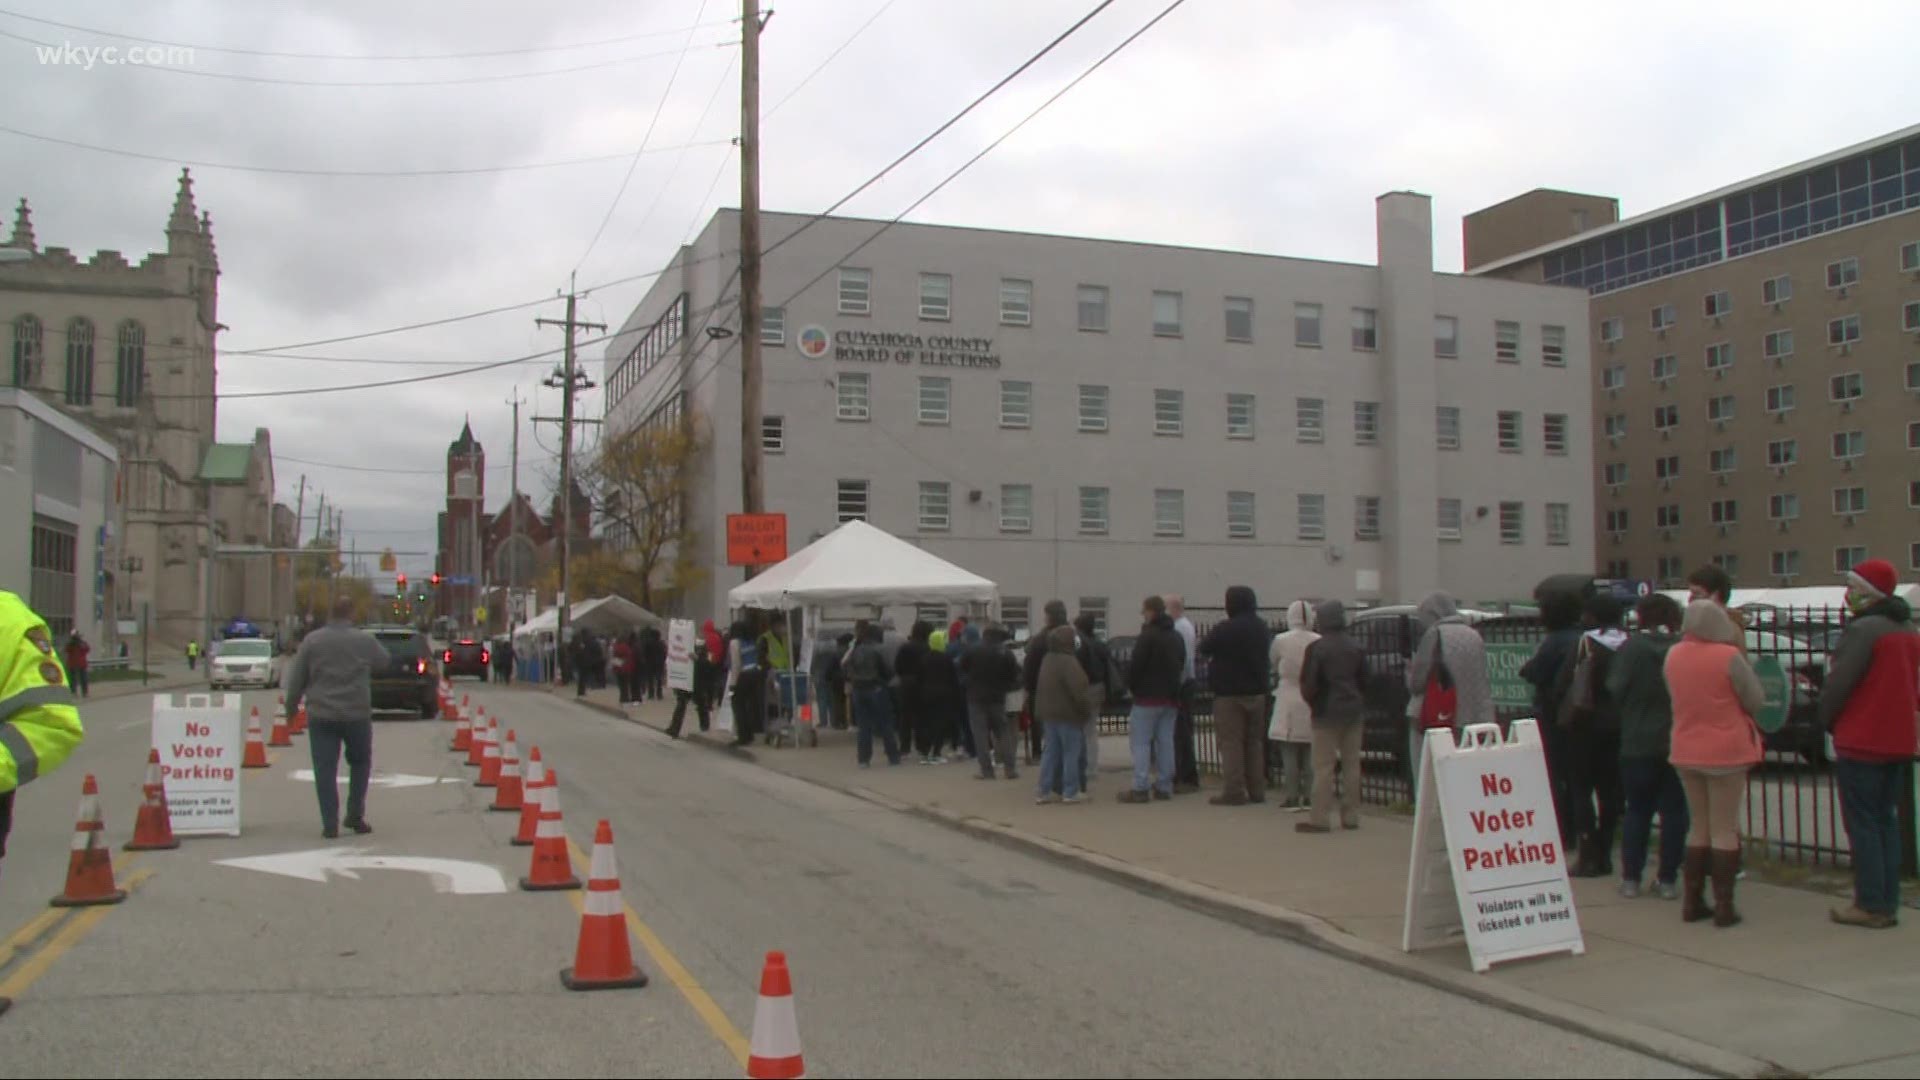 Today marked the first Saturday of weekend hours for early voting in Ohio. At one point, the line wrapped around the block and extended up the off-ramp for I-90.